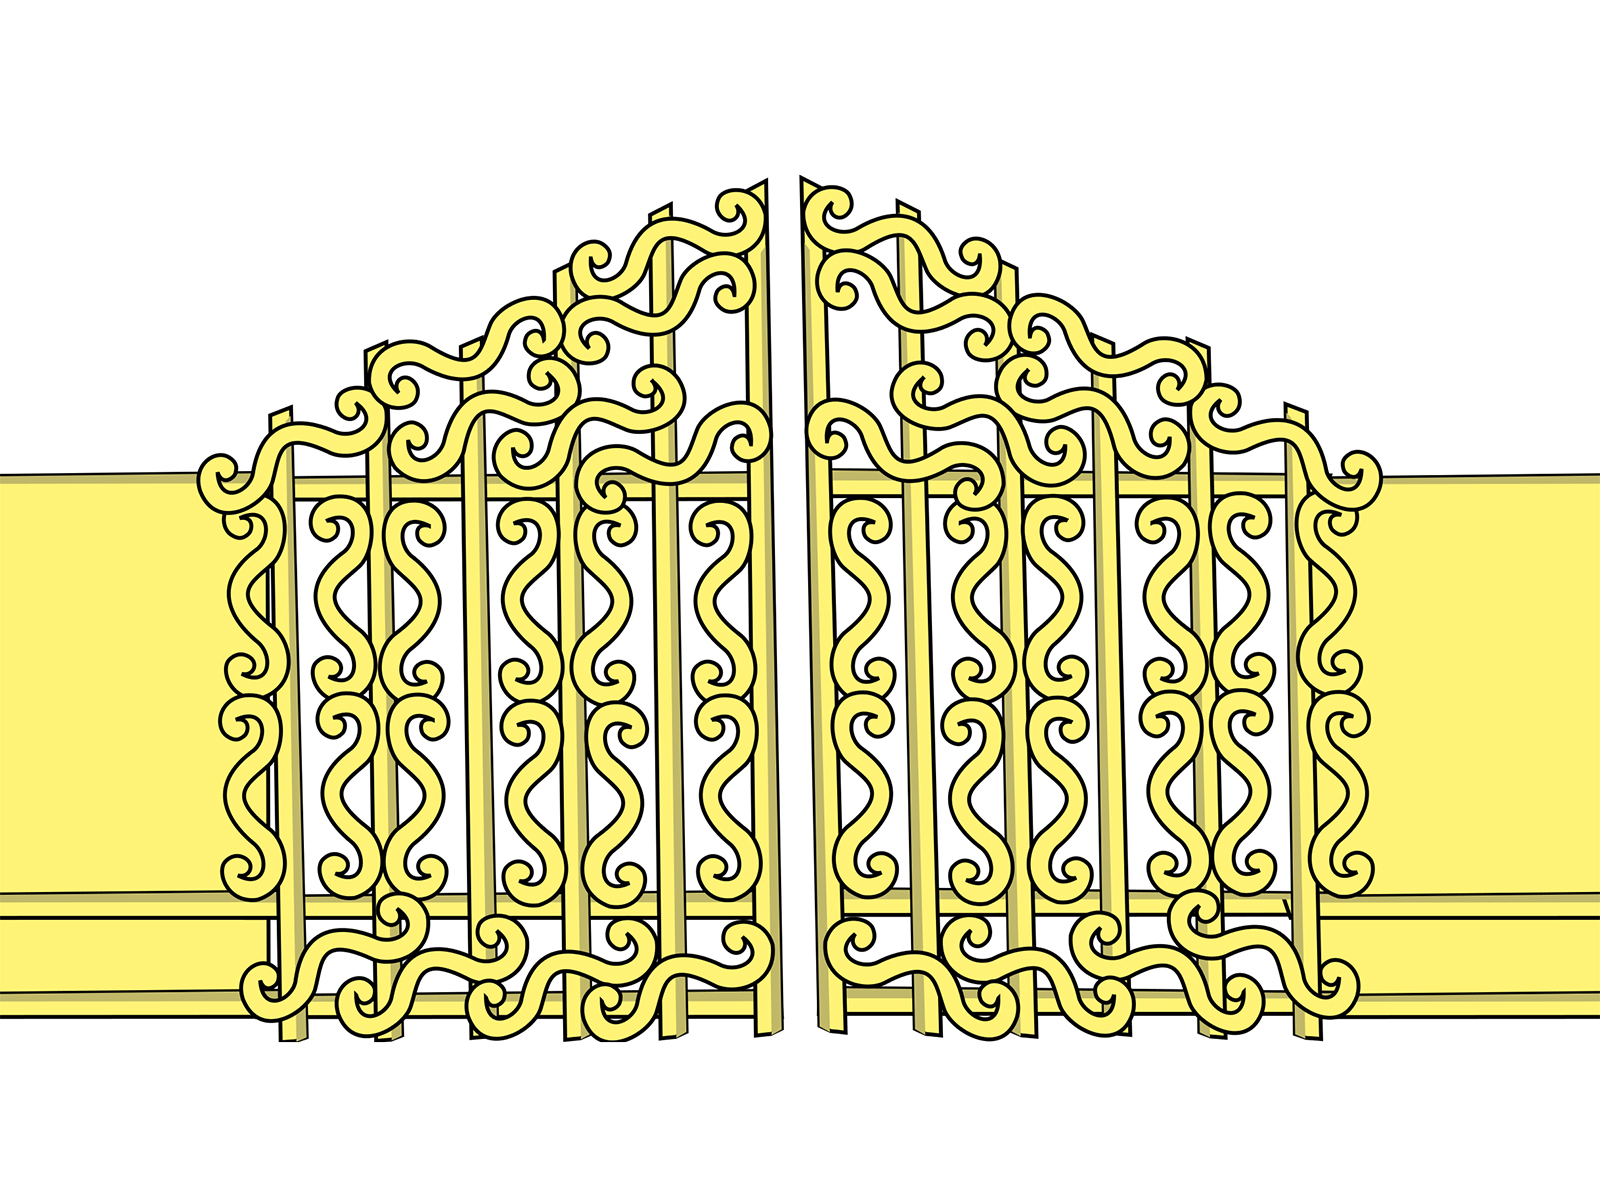 pearly gates clipart - photo #6